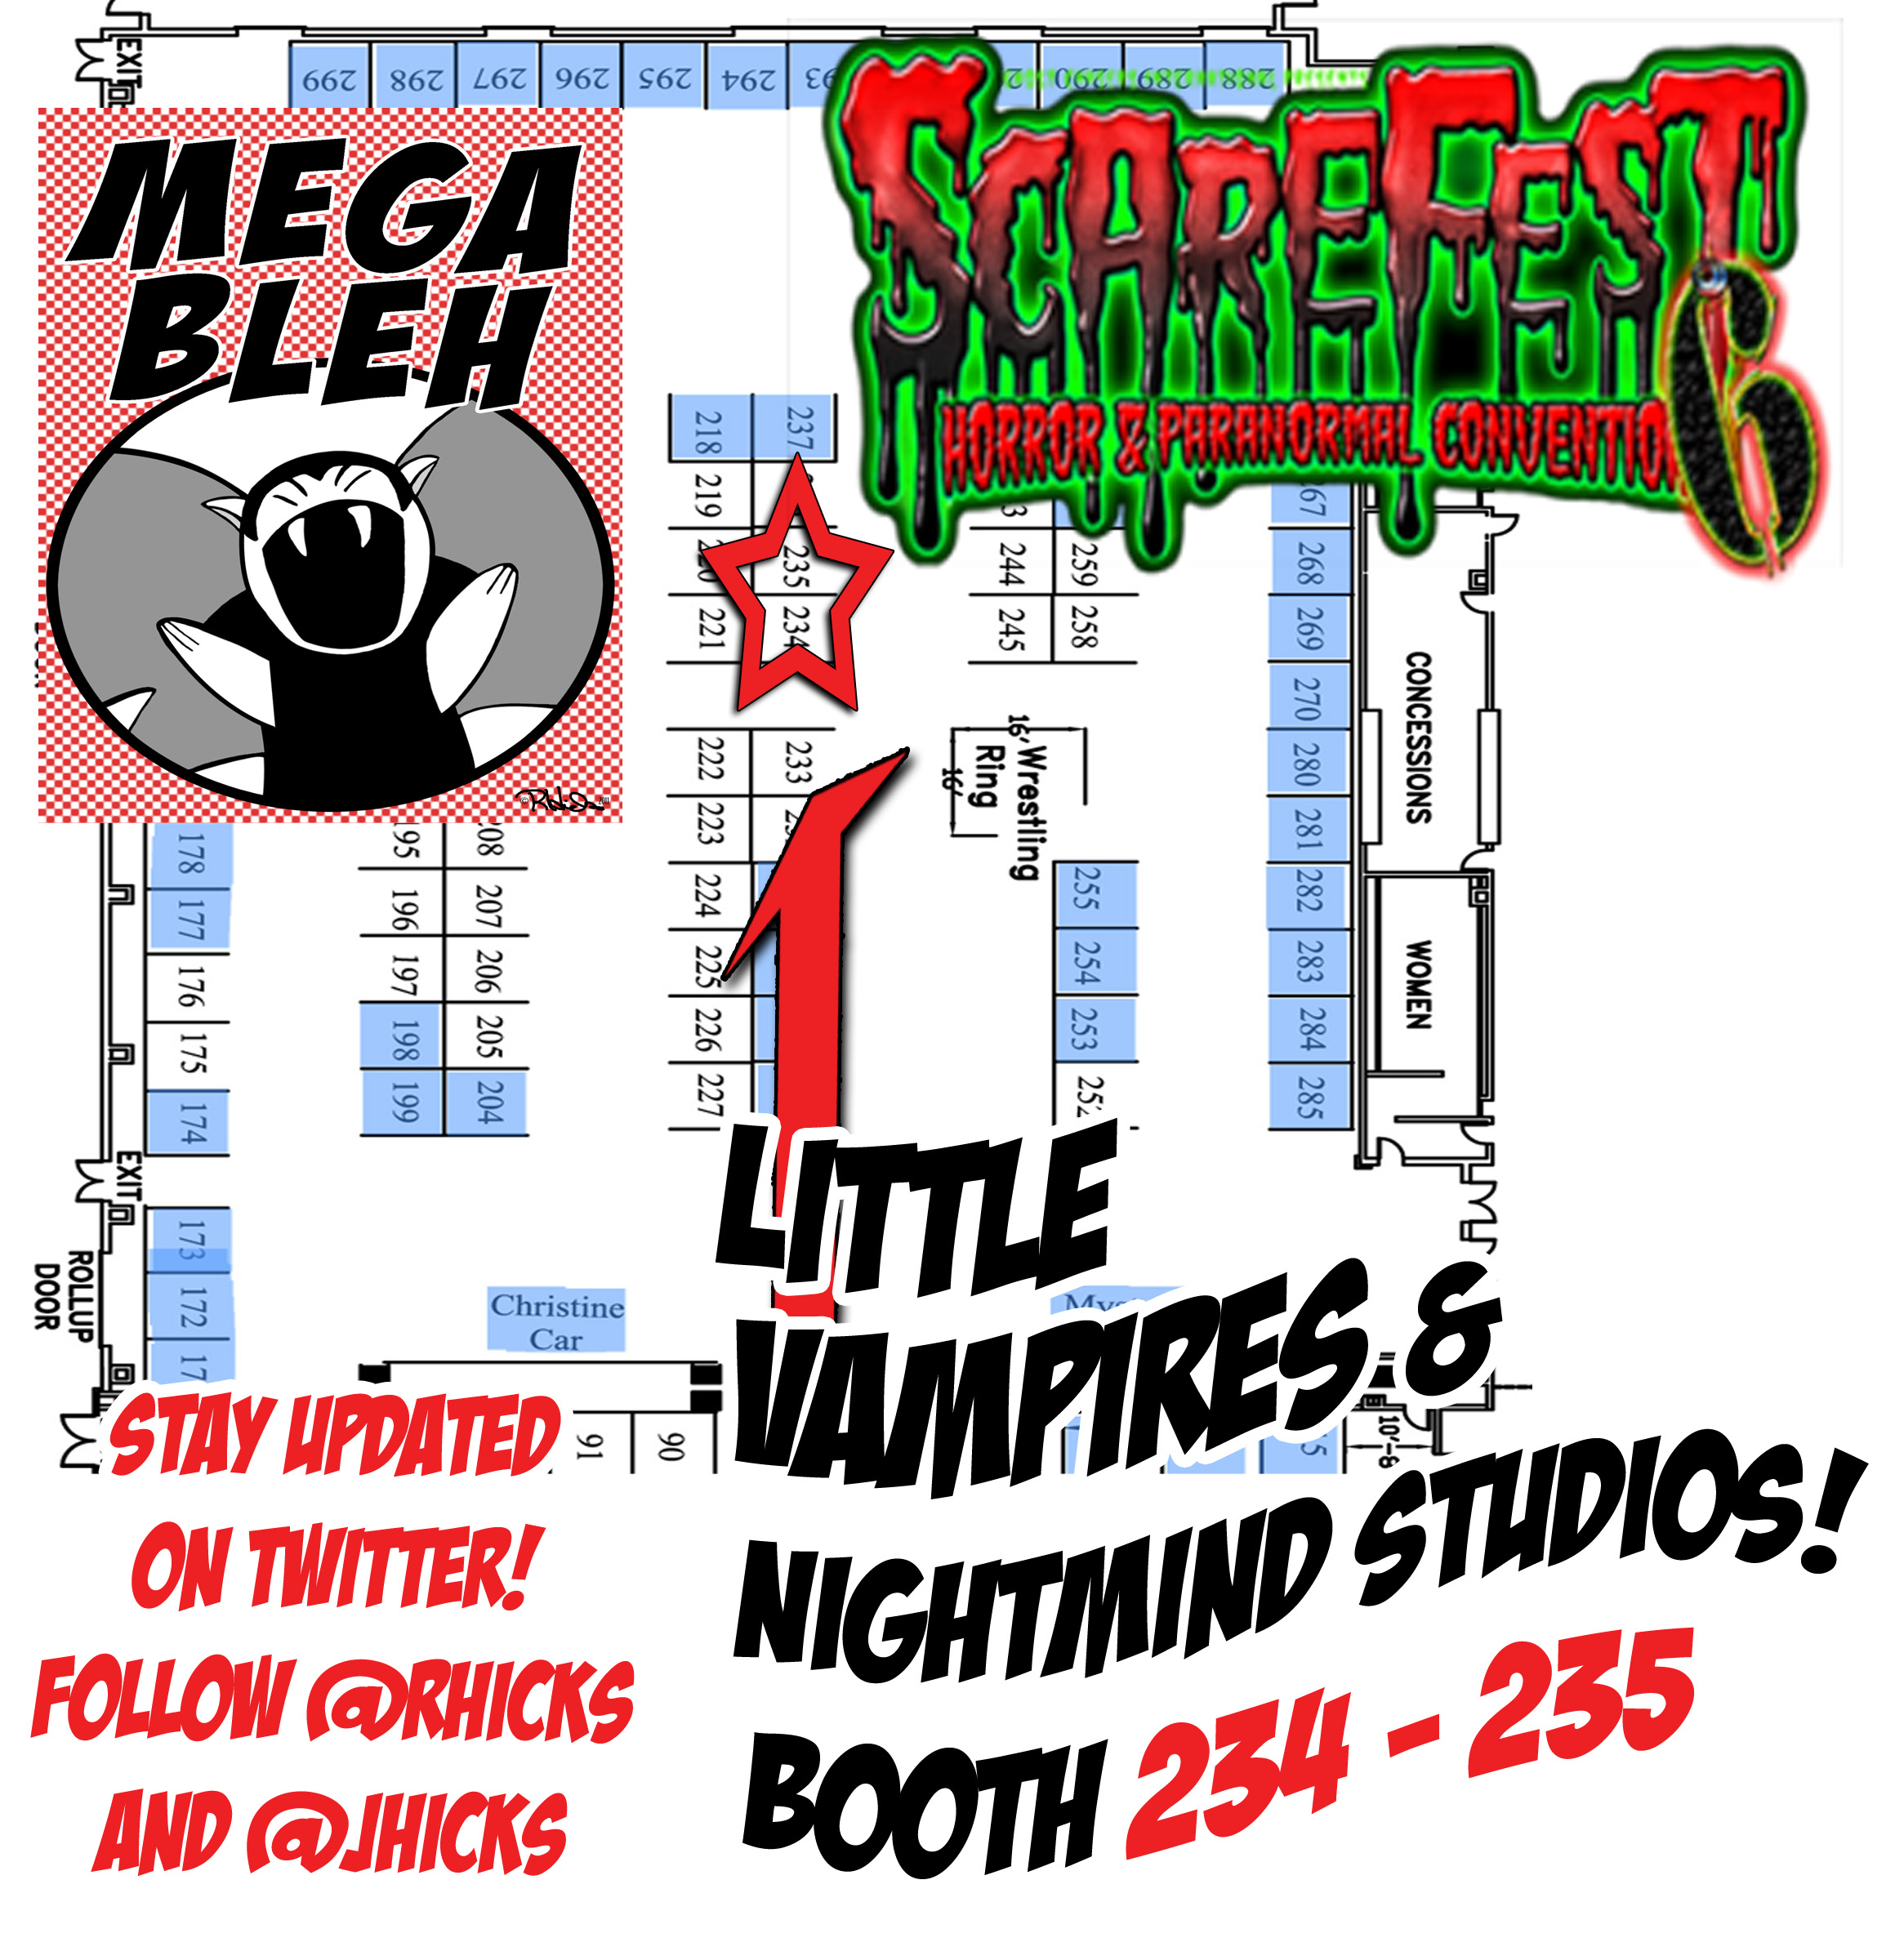 Scarefest 2013 exhibitor floor map with the Little Vampires booth highlighted